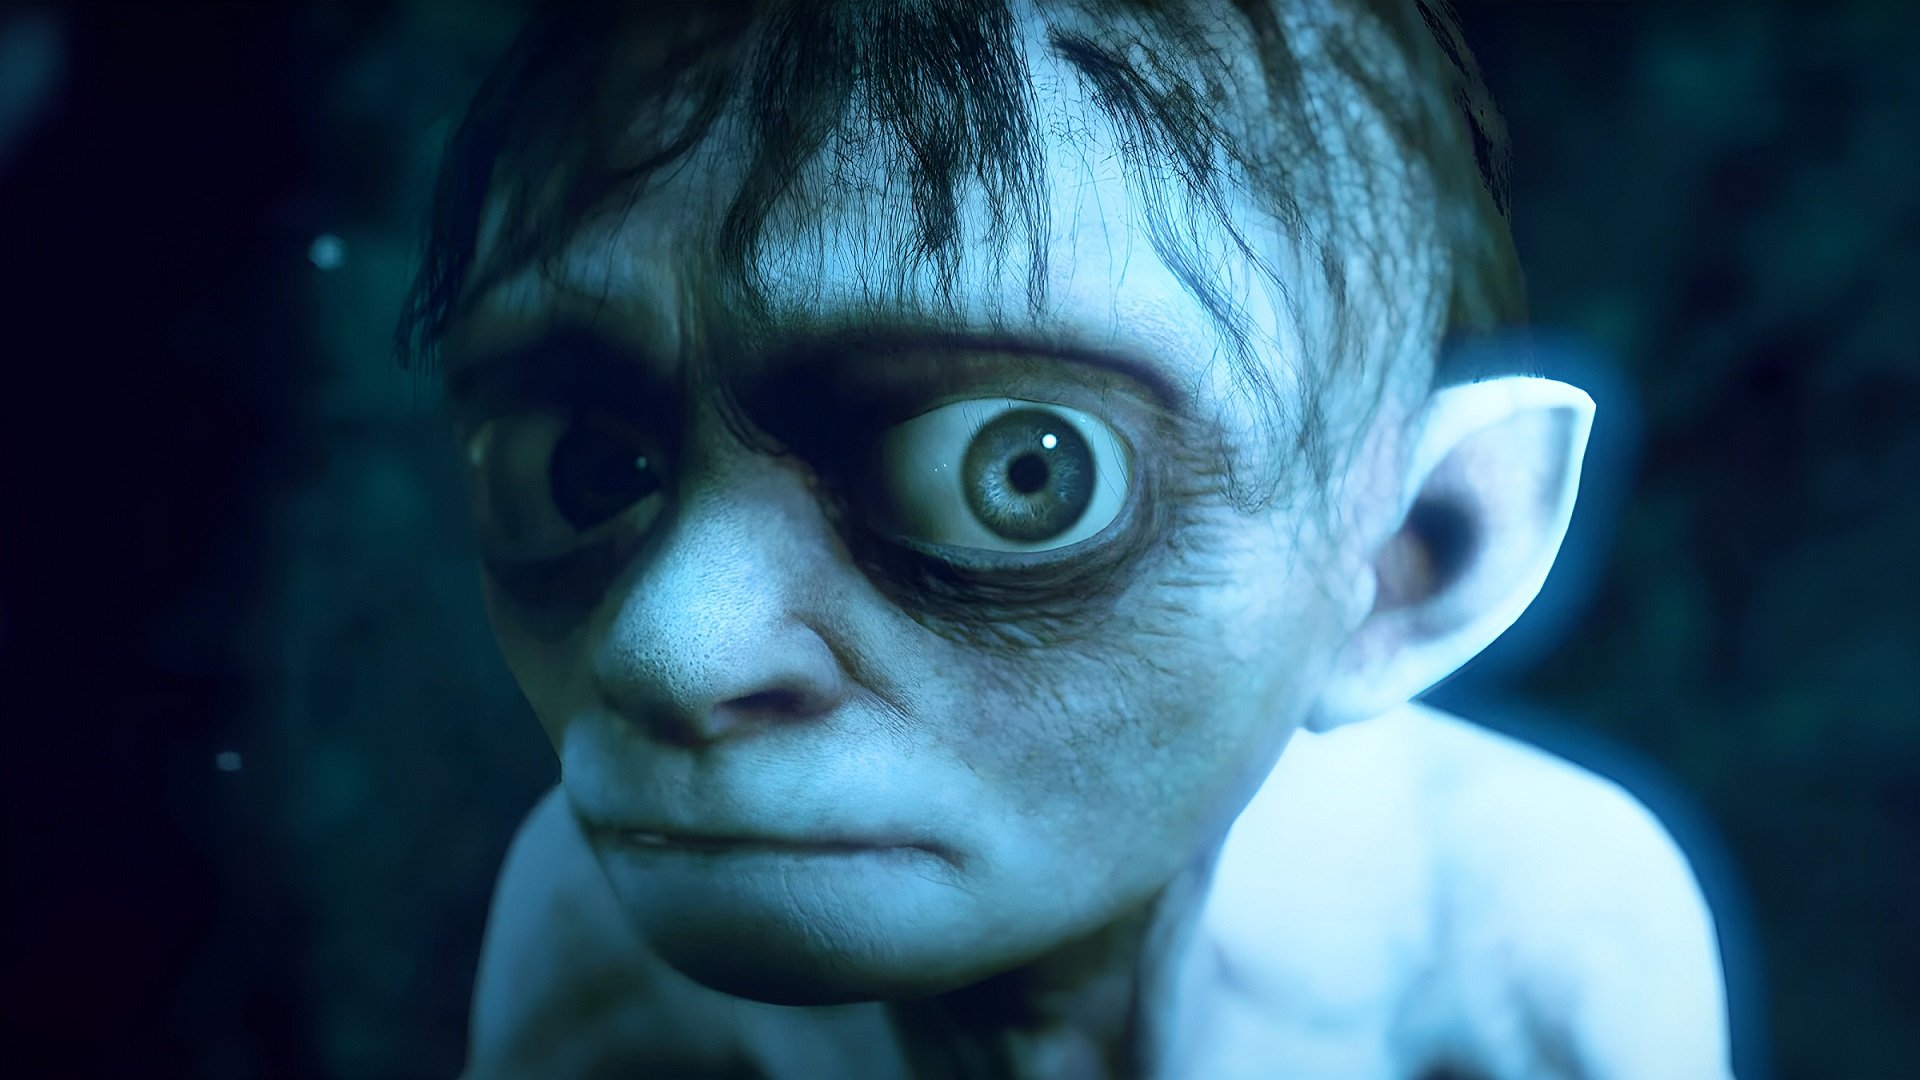 Here's a brief look at The Lord of the Rings: Gollum gameplay